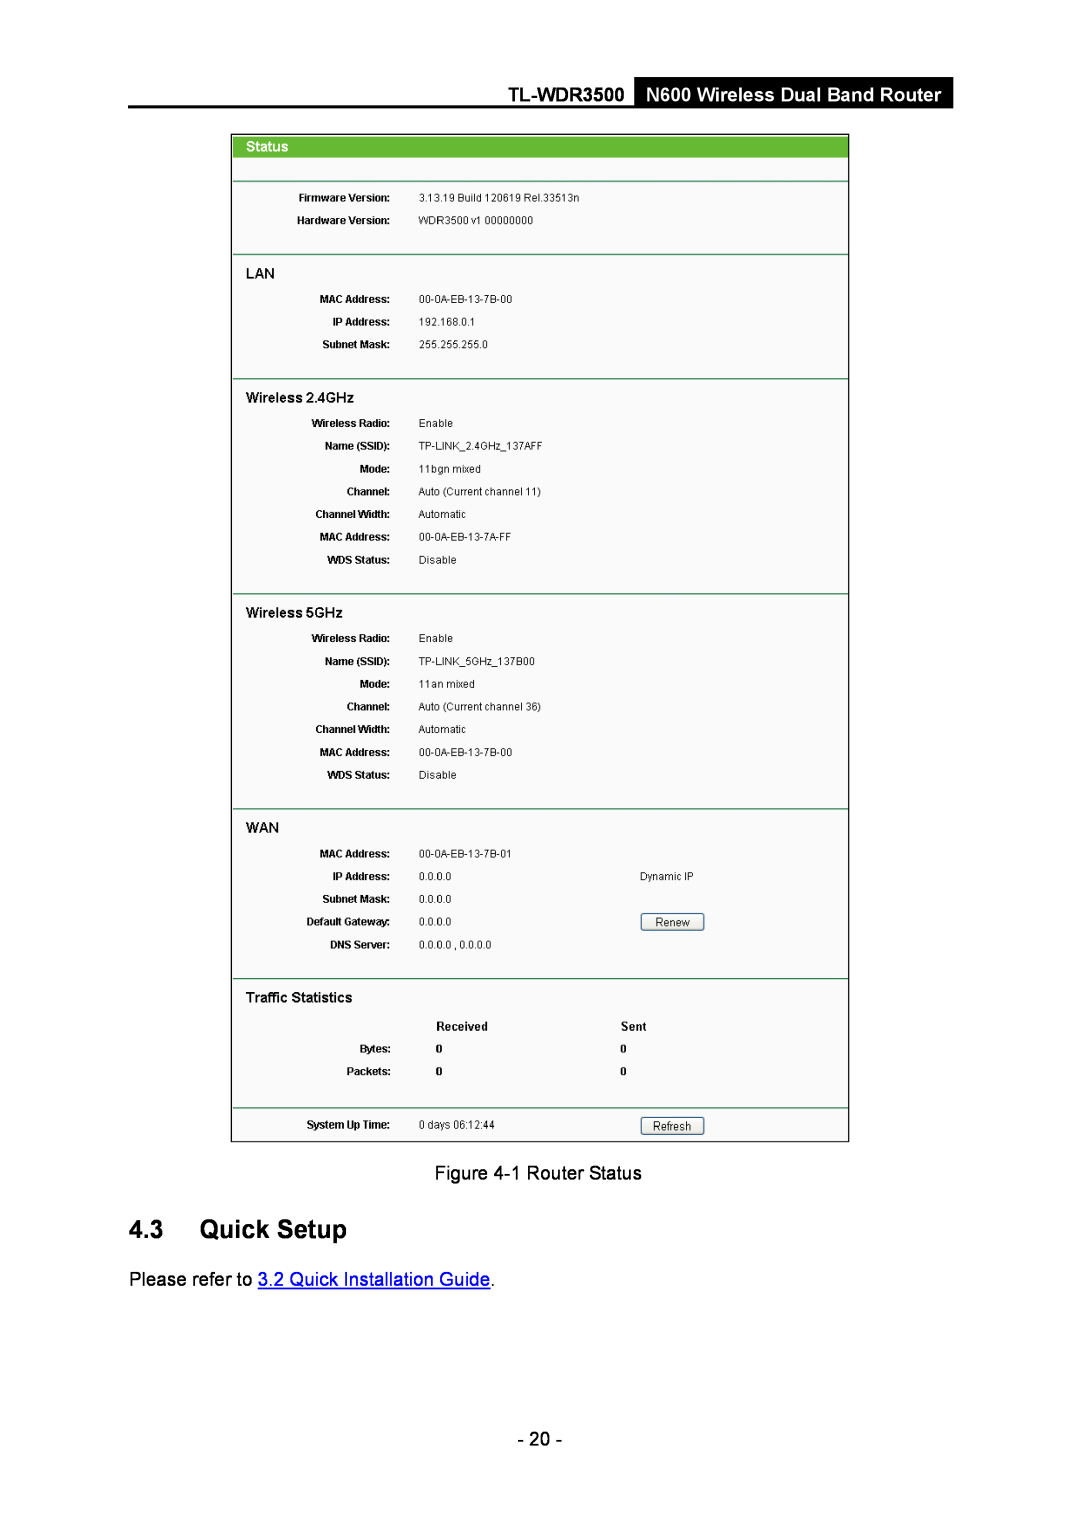 TP-Link manual Quick Setup, Please refer to 3.2 Quick Installation Guide, TL-WDR3500 N600 Wireless Dual Band Router 